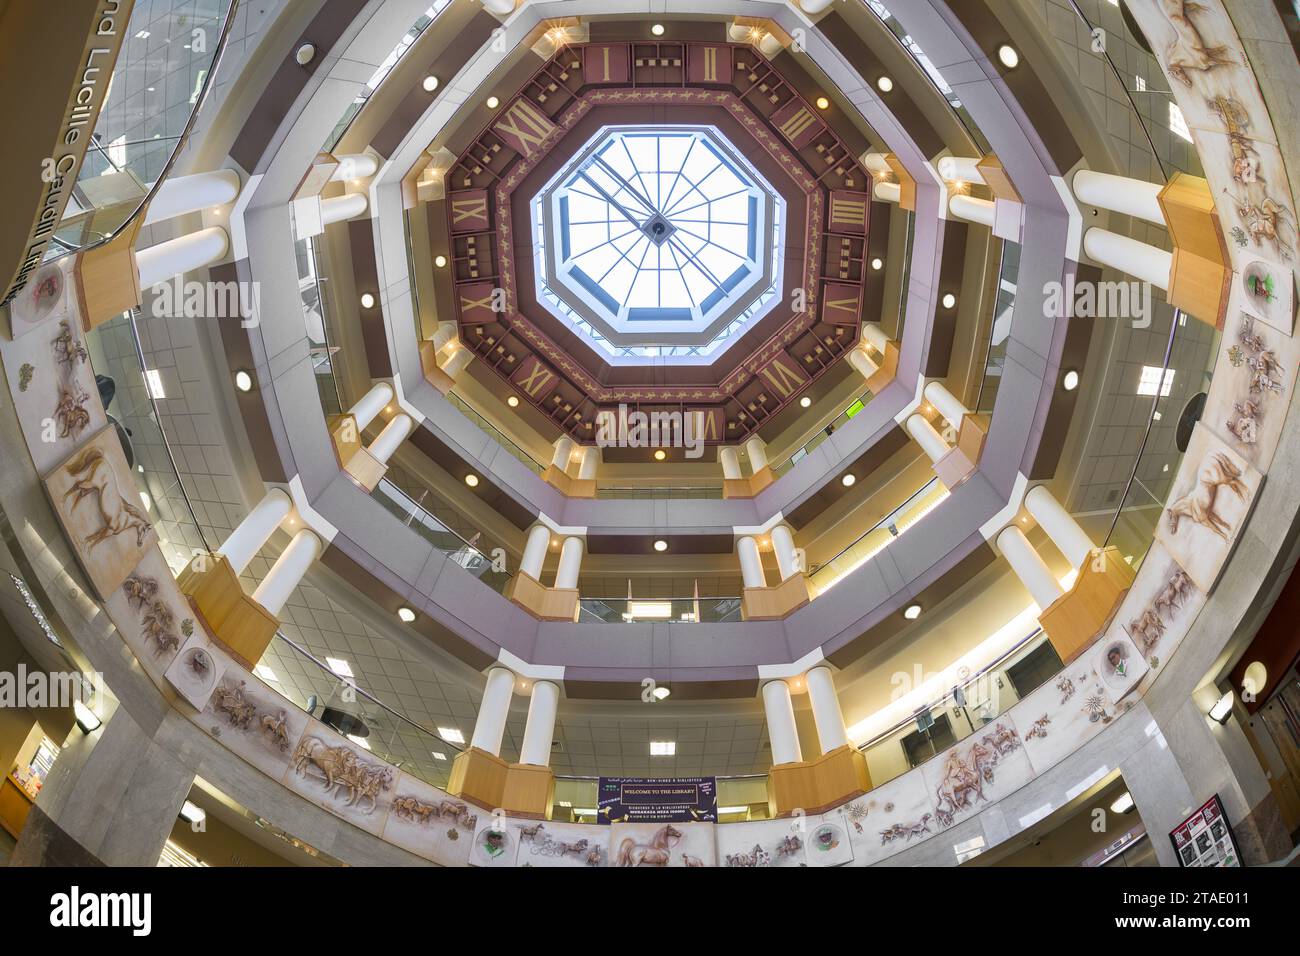 Rotunda and world's largest ceiling clock in the Lexington Public Library at 140 E Main Street in Lexington, Kentucky Stock Photo